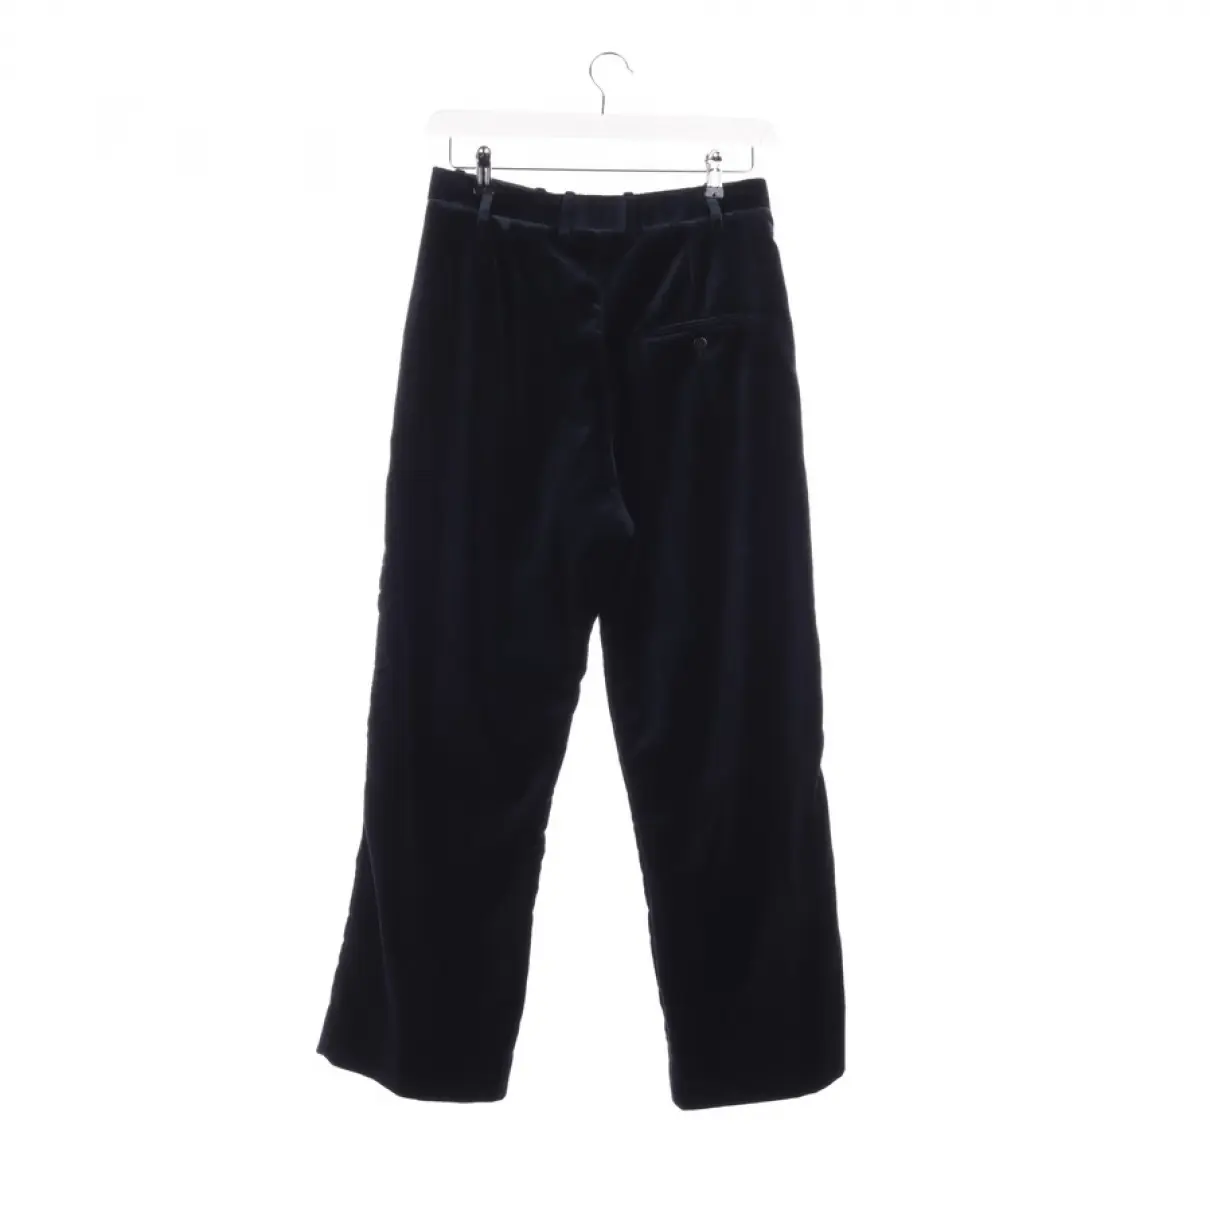 Buy Brioni Trousers online